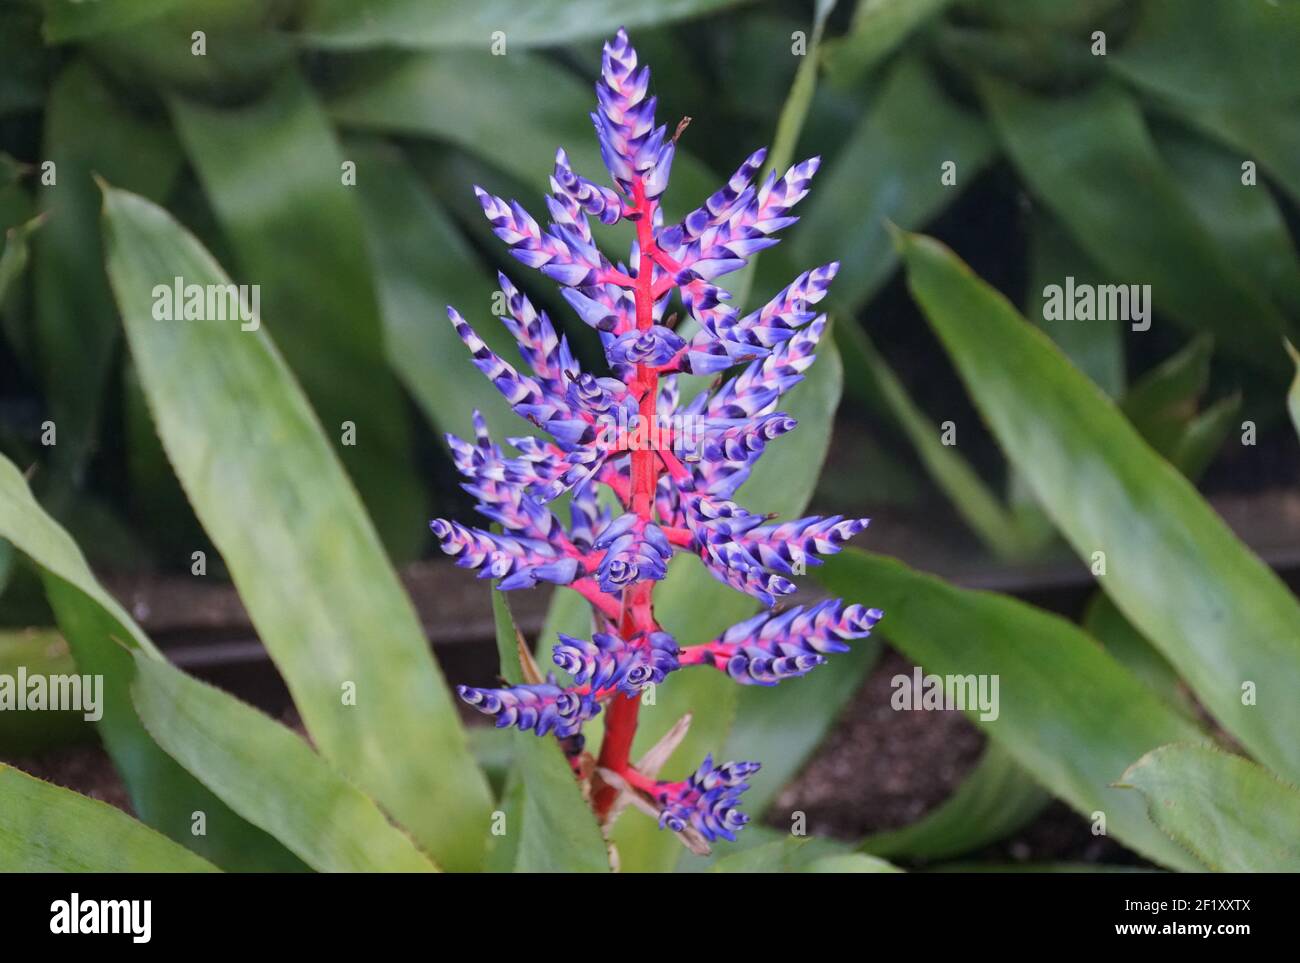 The bright blue and red bromeliad upright flowers Stock Photo